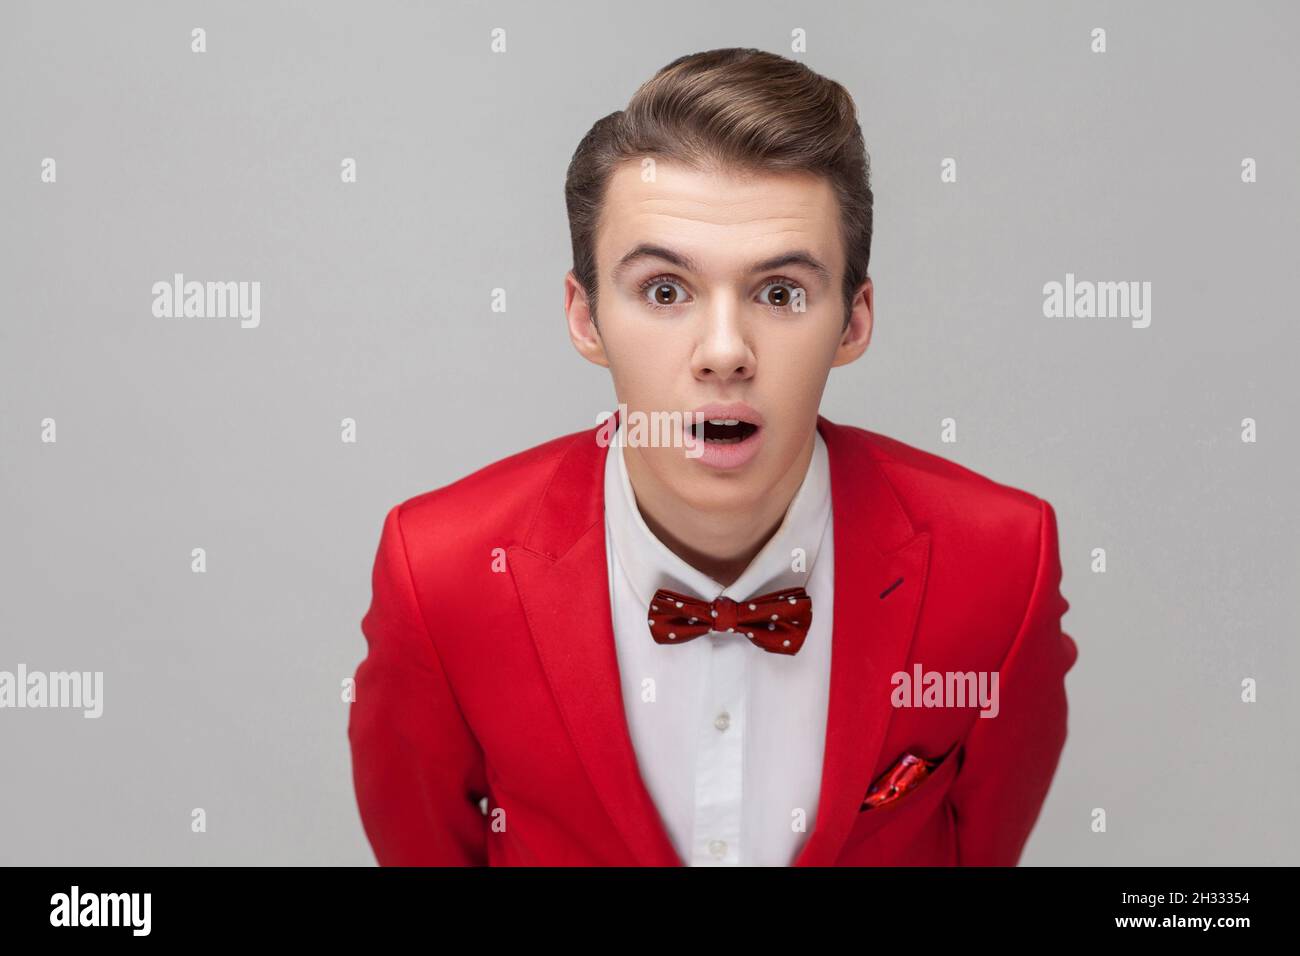 Portrait of handsome gentleman with stylish hairdo in red tuxedo and bow tie standing with big eyes and open mouth, looking at camera in amazement, shock. studio shot isolated on gray background Stock Photo